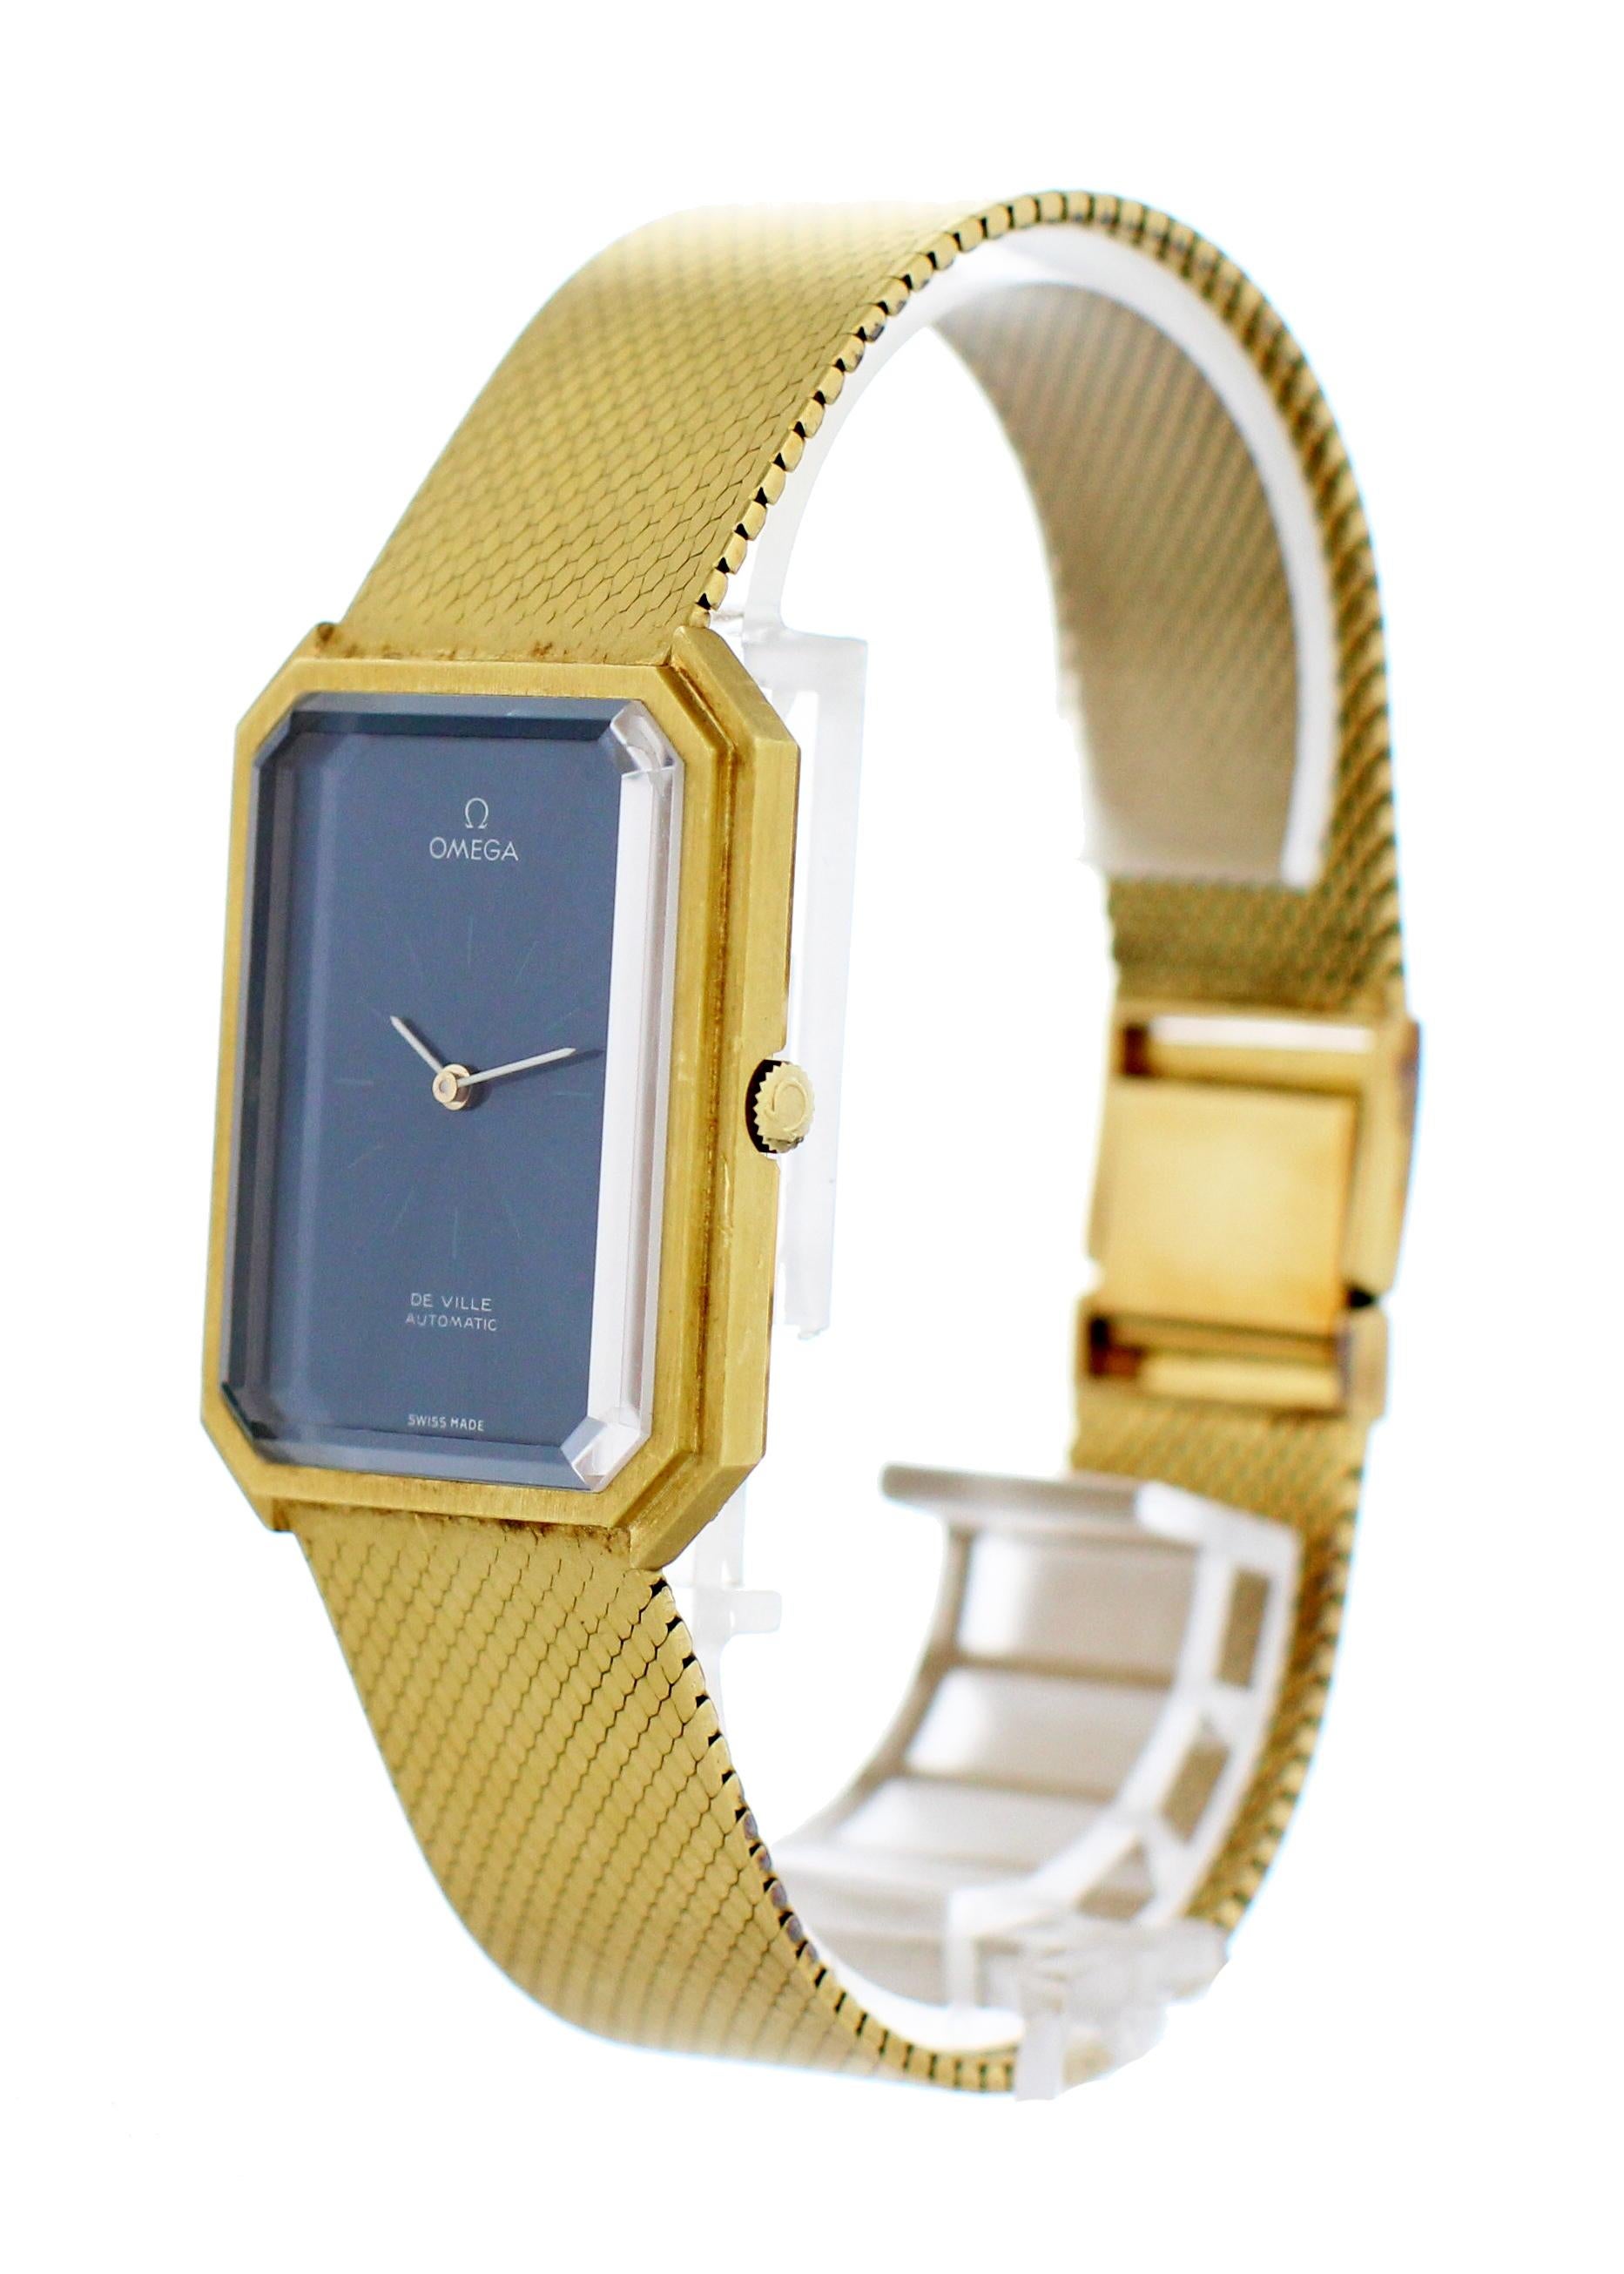 Omega De Ville Vintage 18k Yellow Gold Watch. 27mm 18k yellow gold case. Blue dial with yellow gold hands and indexes. 18k yellow gold smooth finish mesh bracelet with an adjustable jewelry clasp. Will fit up to a 7.25-inch wrist. Automatic